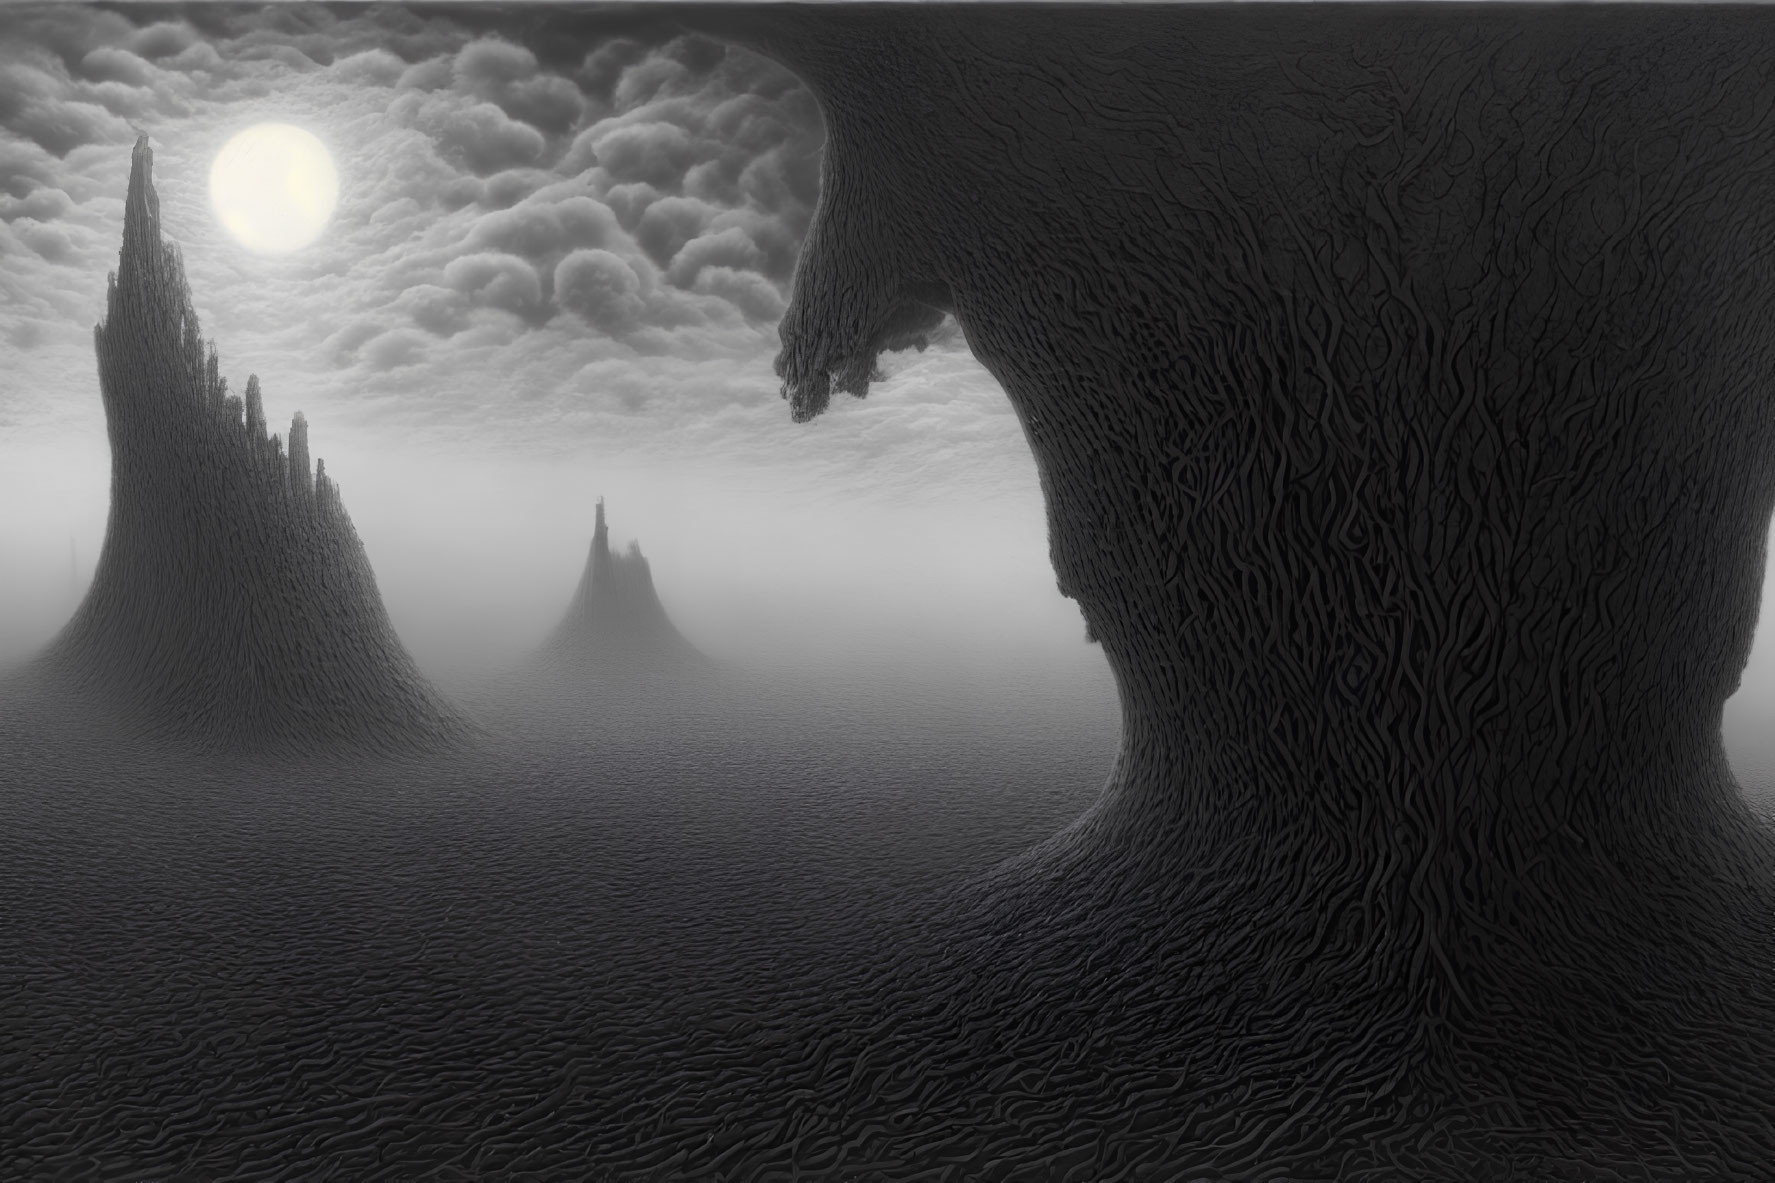 Monochrome landscape with textured tree-like structures under moonlit sky